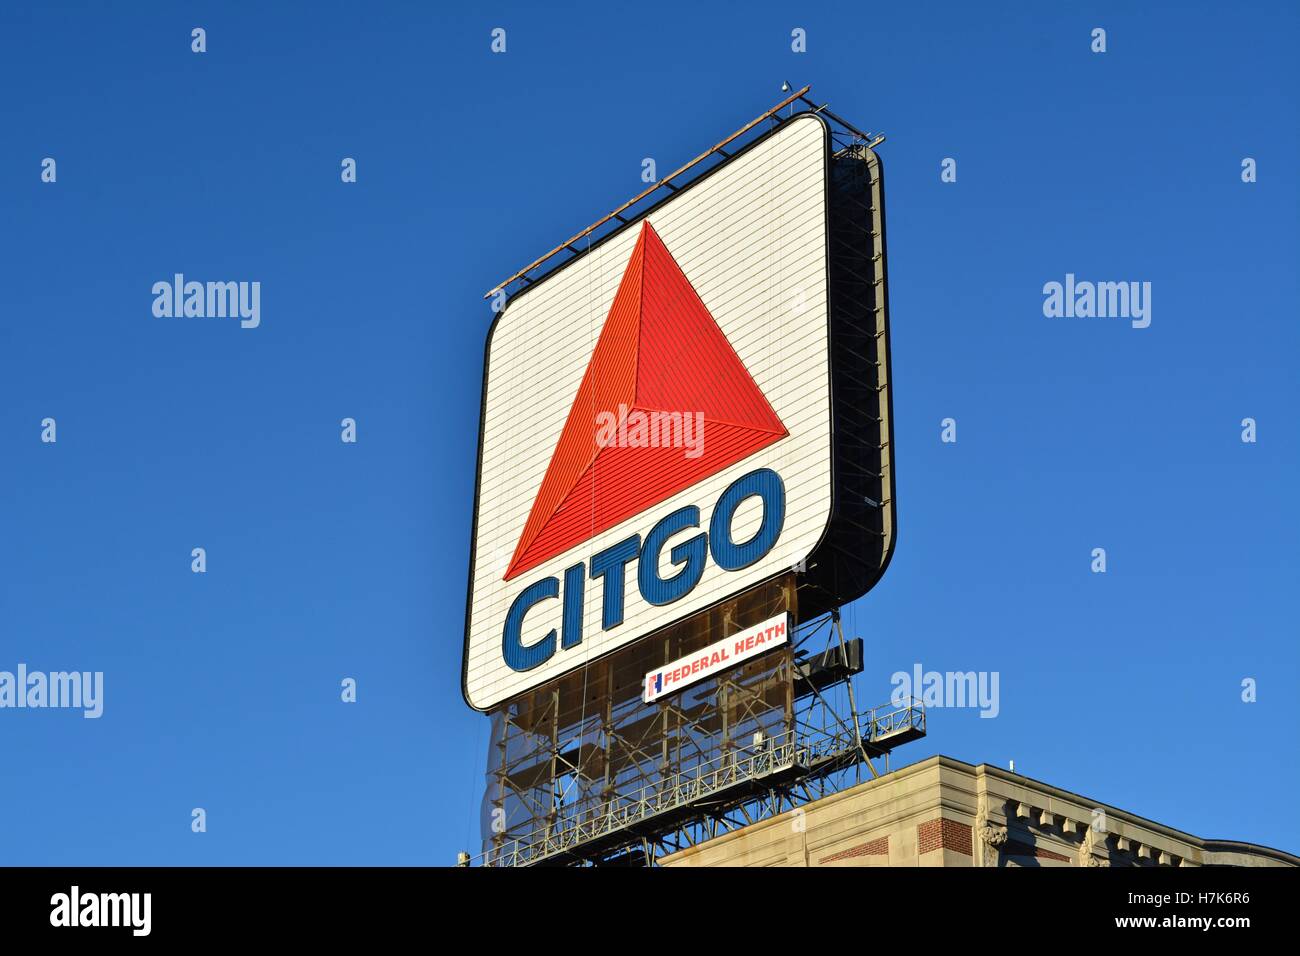 The iconic CITGO sign in Kenmore Square in Boston's Fenway neighborhood. Stock Photo